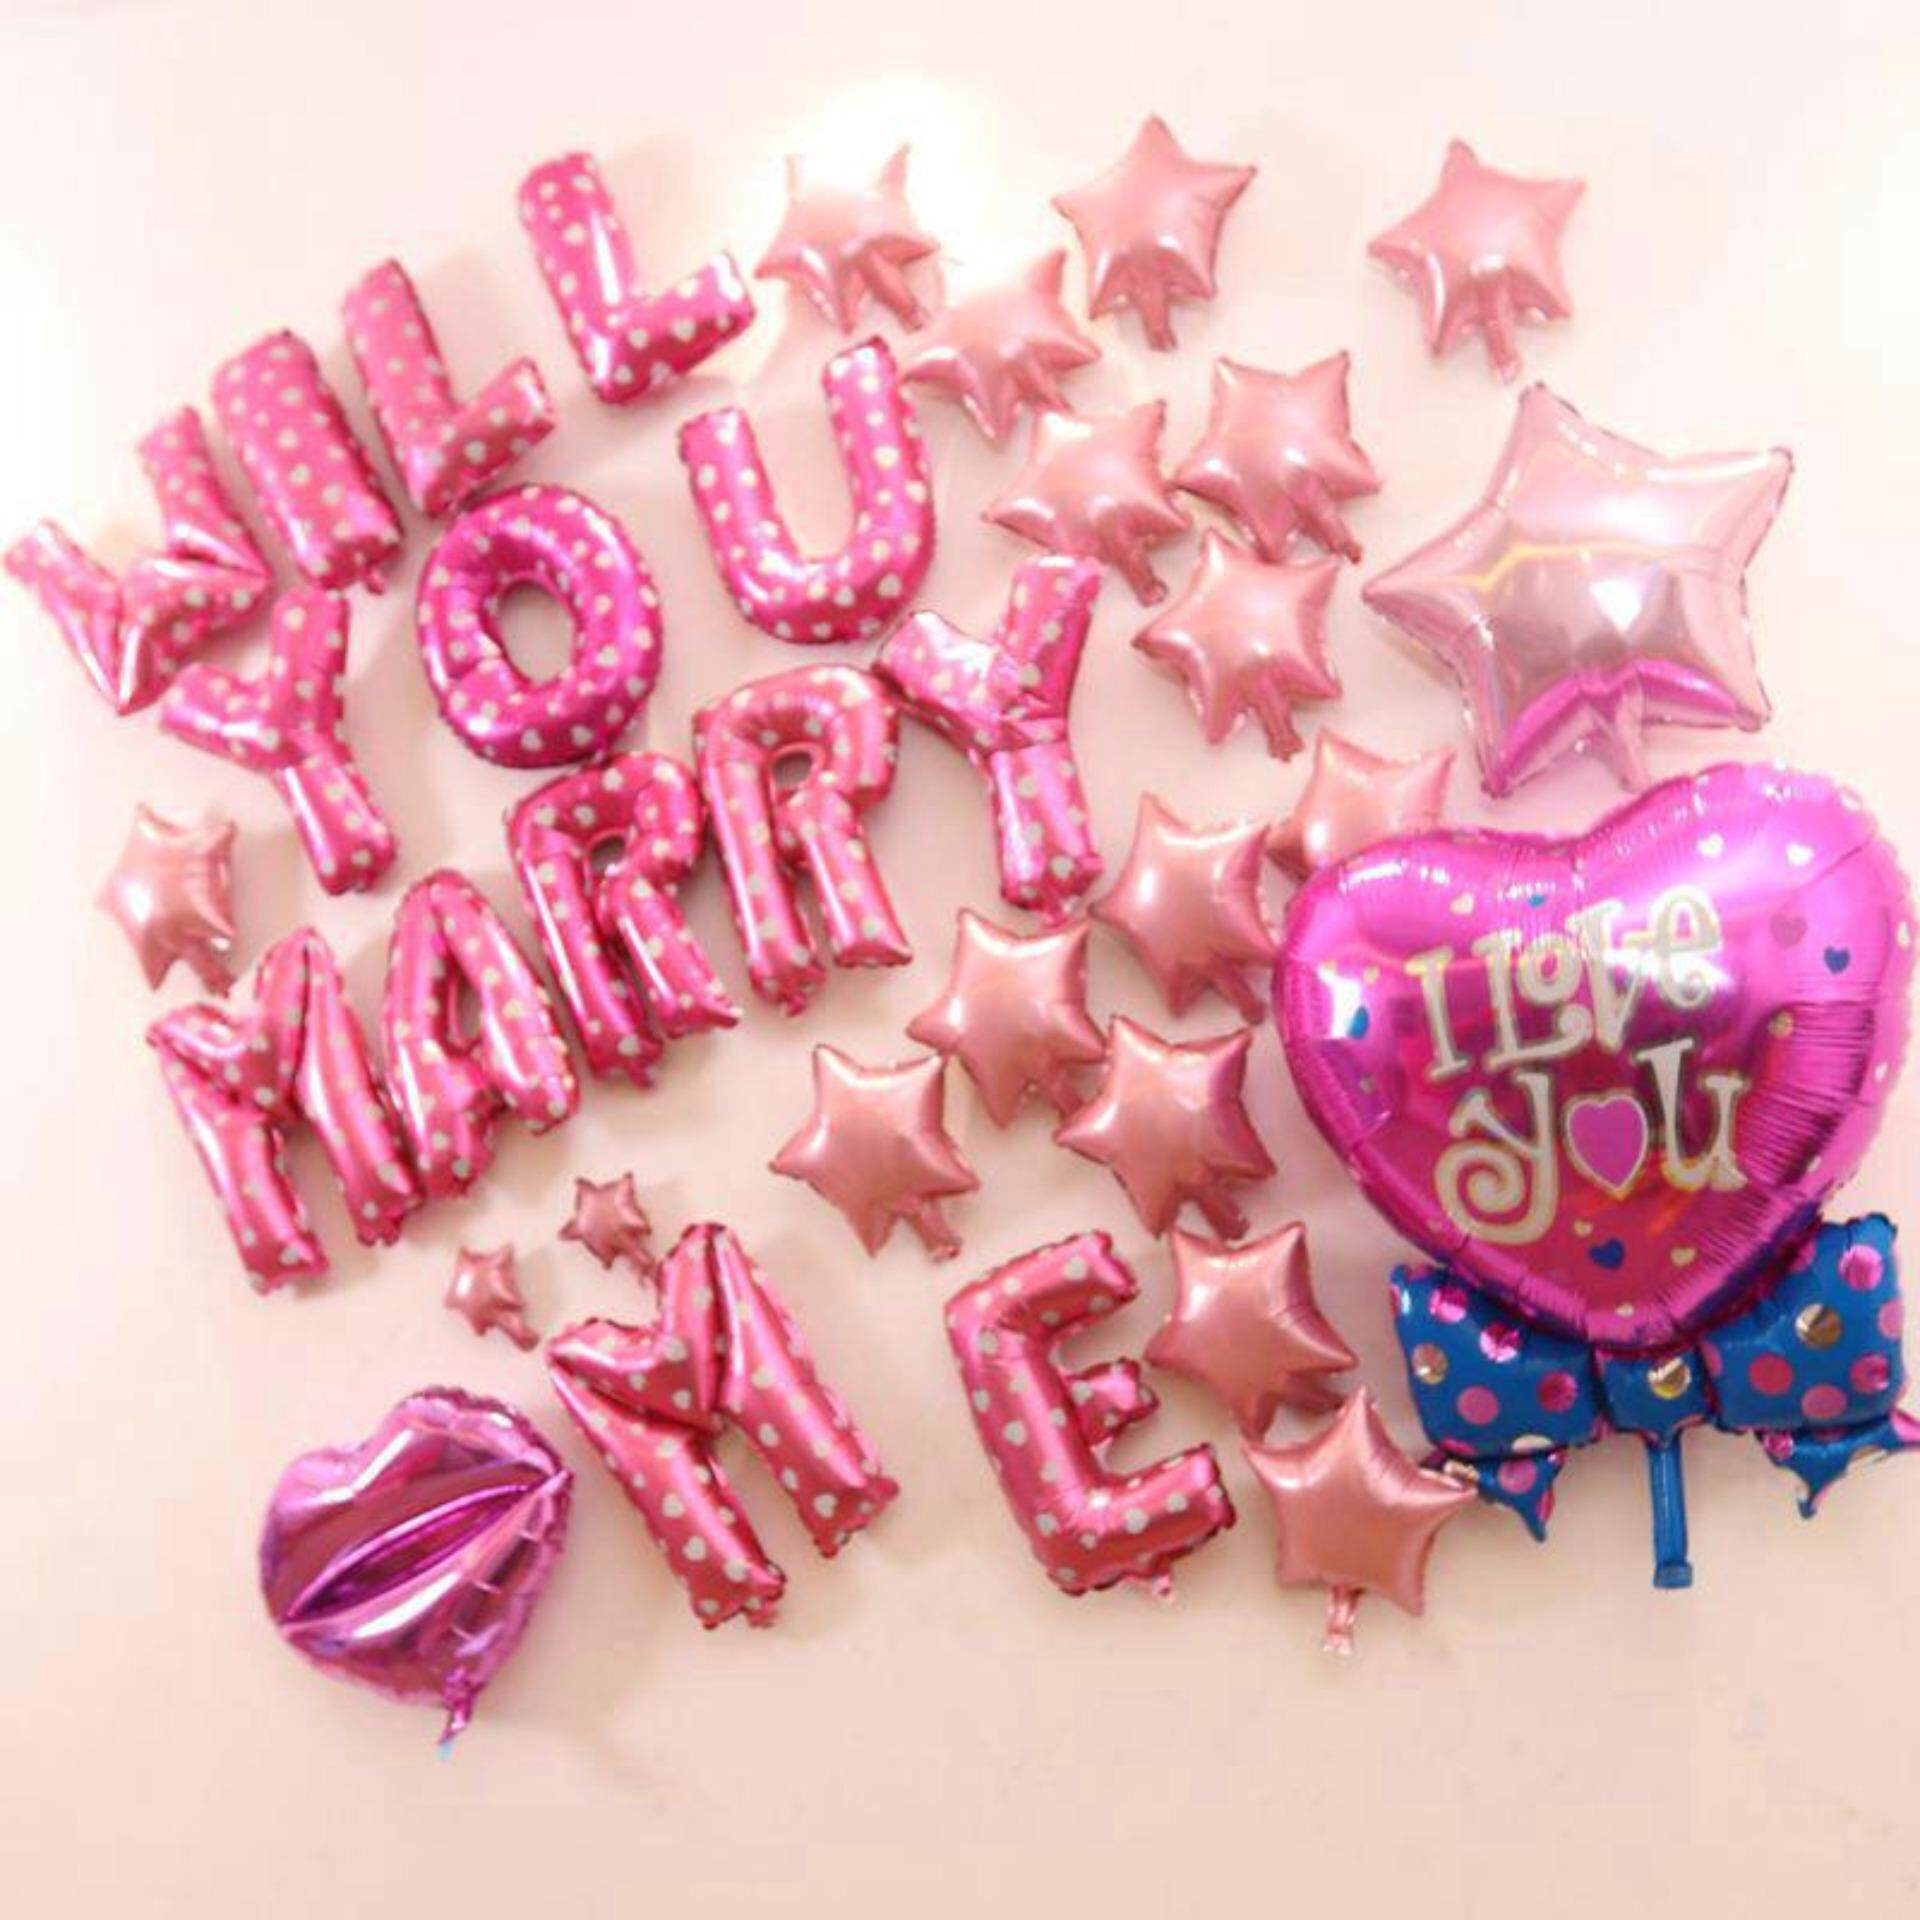 WILL YOU MARRY ME Foil Balloons Wedding Party Purpose Decorations toys for girls